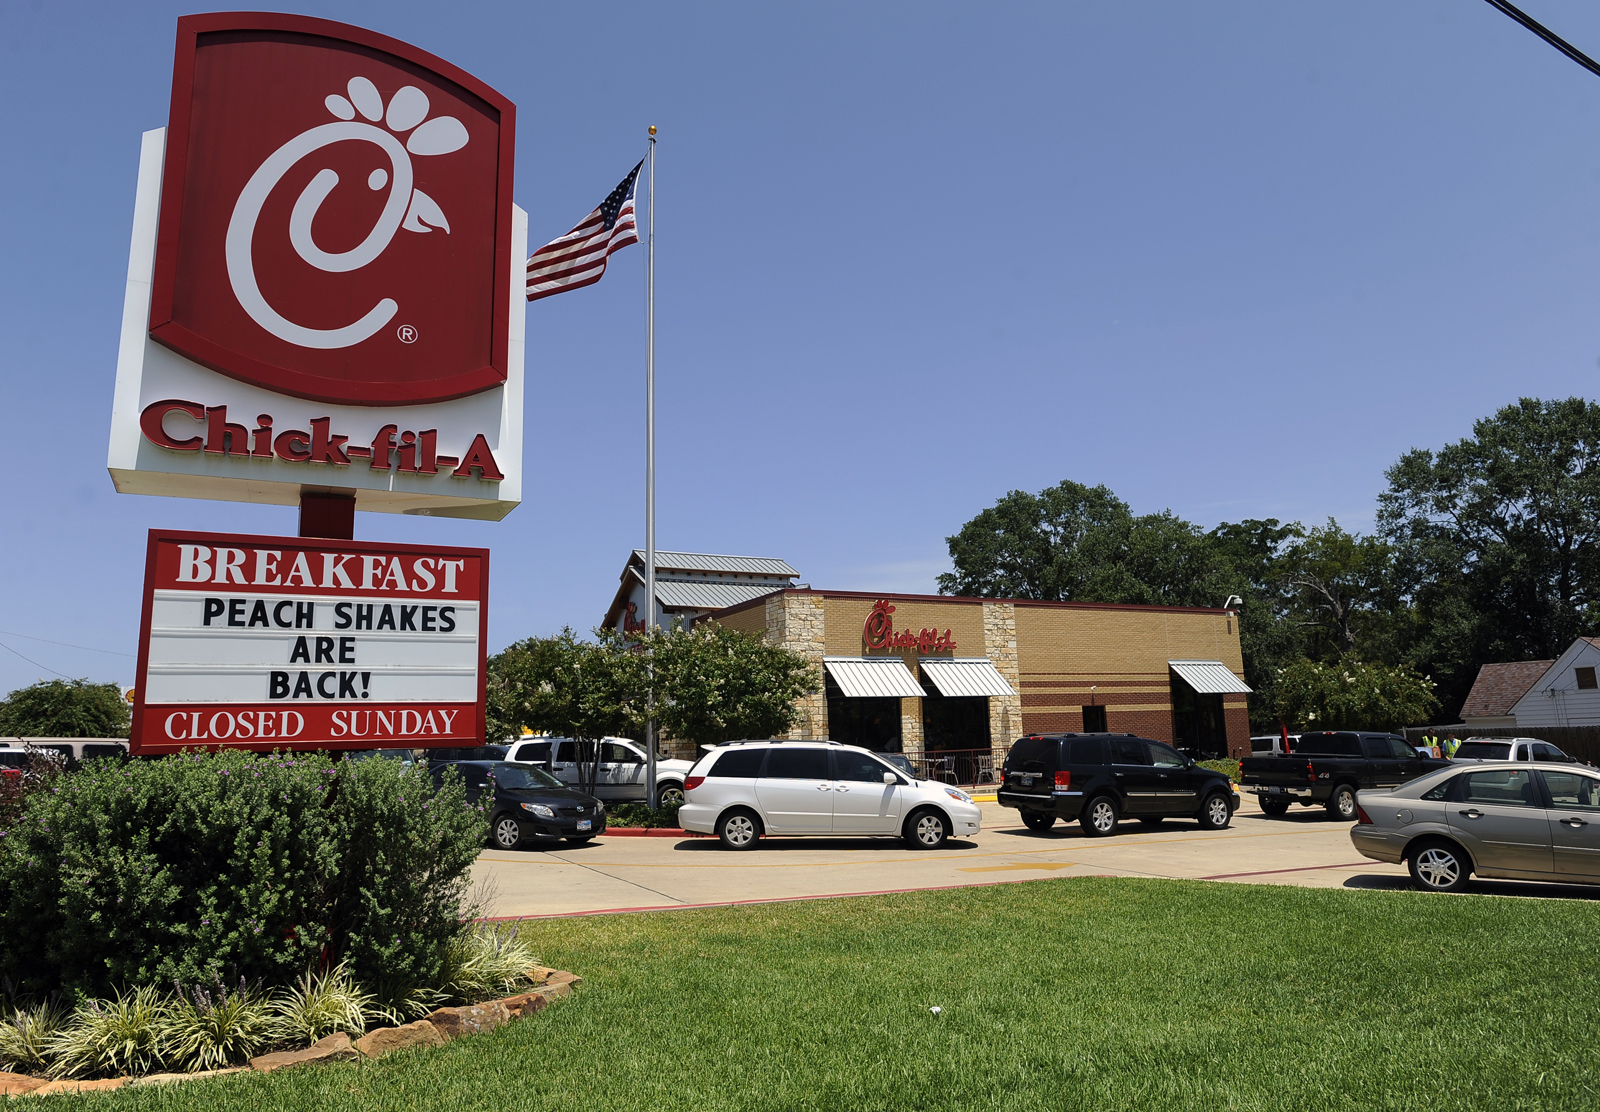 Cars circle around the local Chick-fil-A restaurant Wednesday, Aug. 1, 2012, in honor of Chick-fil-A Appreciation Day in Nacogdoches, Texas. (Andrew D. Brosig—AP)